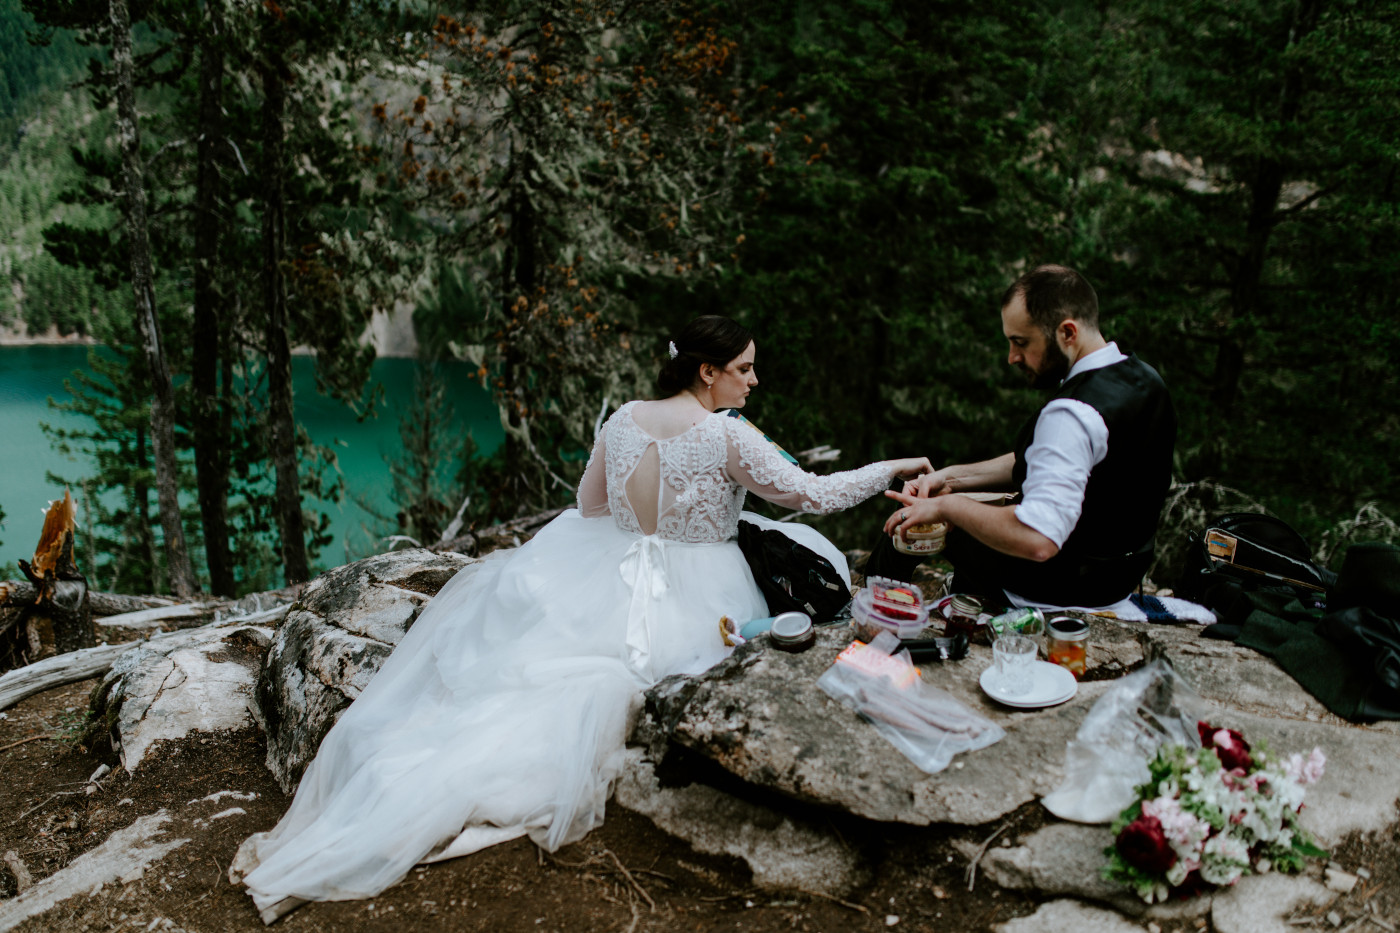 Elizabeth and Alex prepare their picnic in the North Cascades. Elopement photography at North Cascades National Park by Sienna Plus Josh.